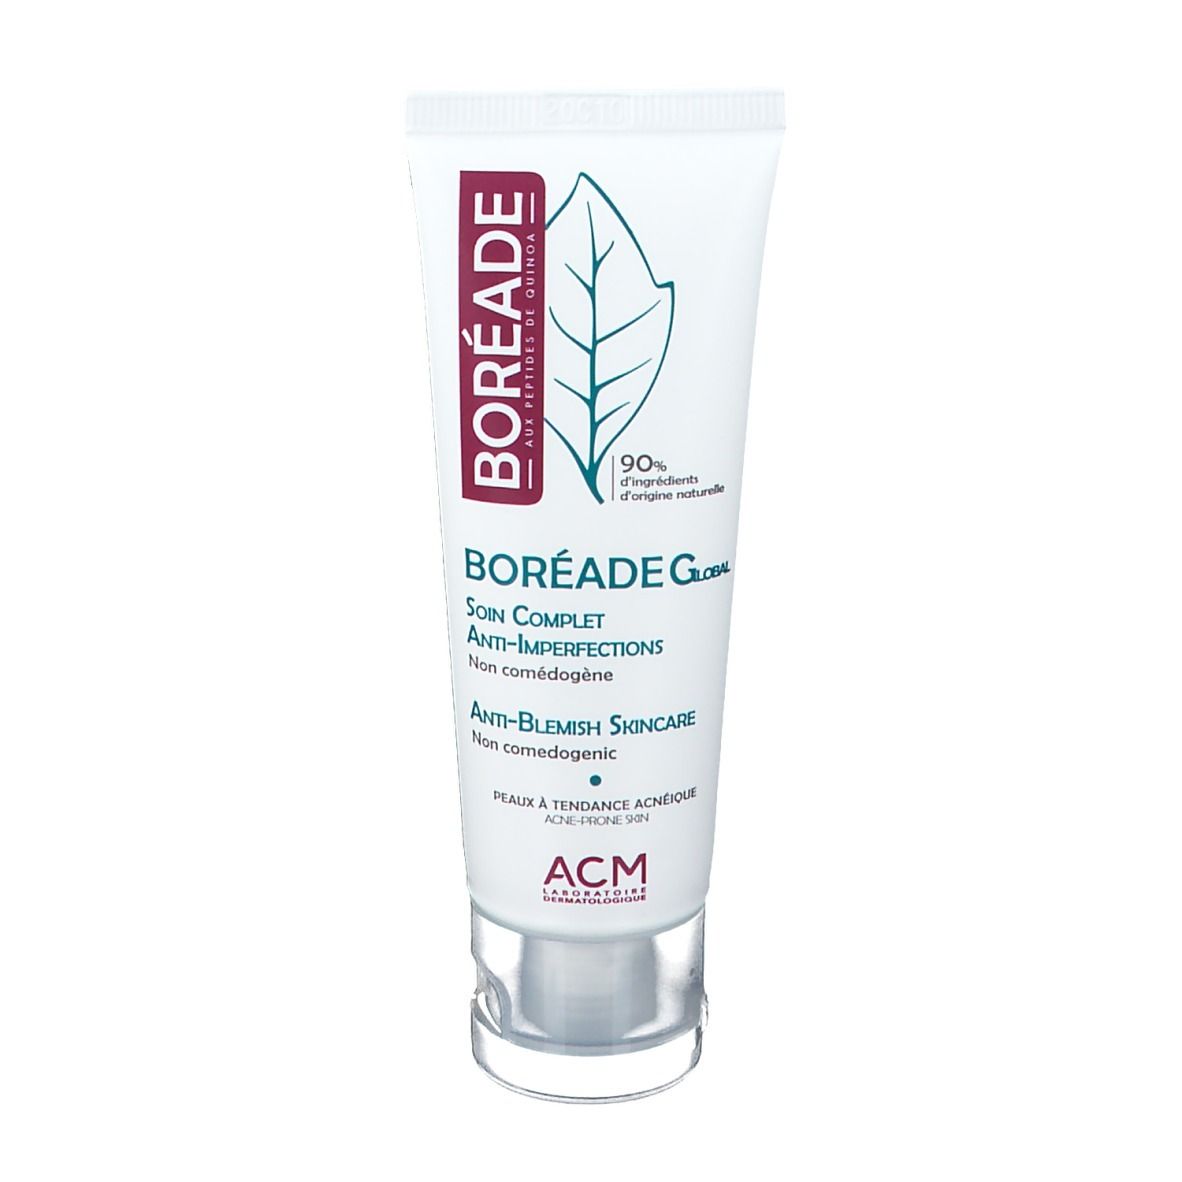 Boréade Global Soin Complet anti-imperfections